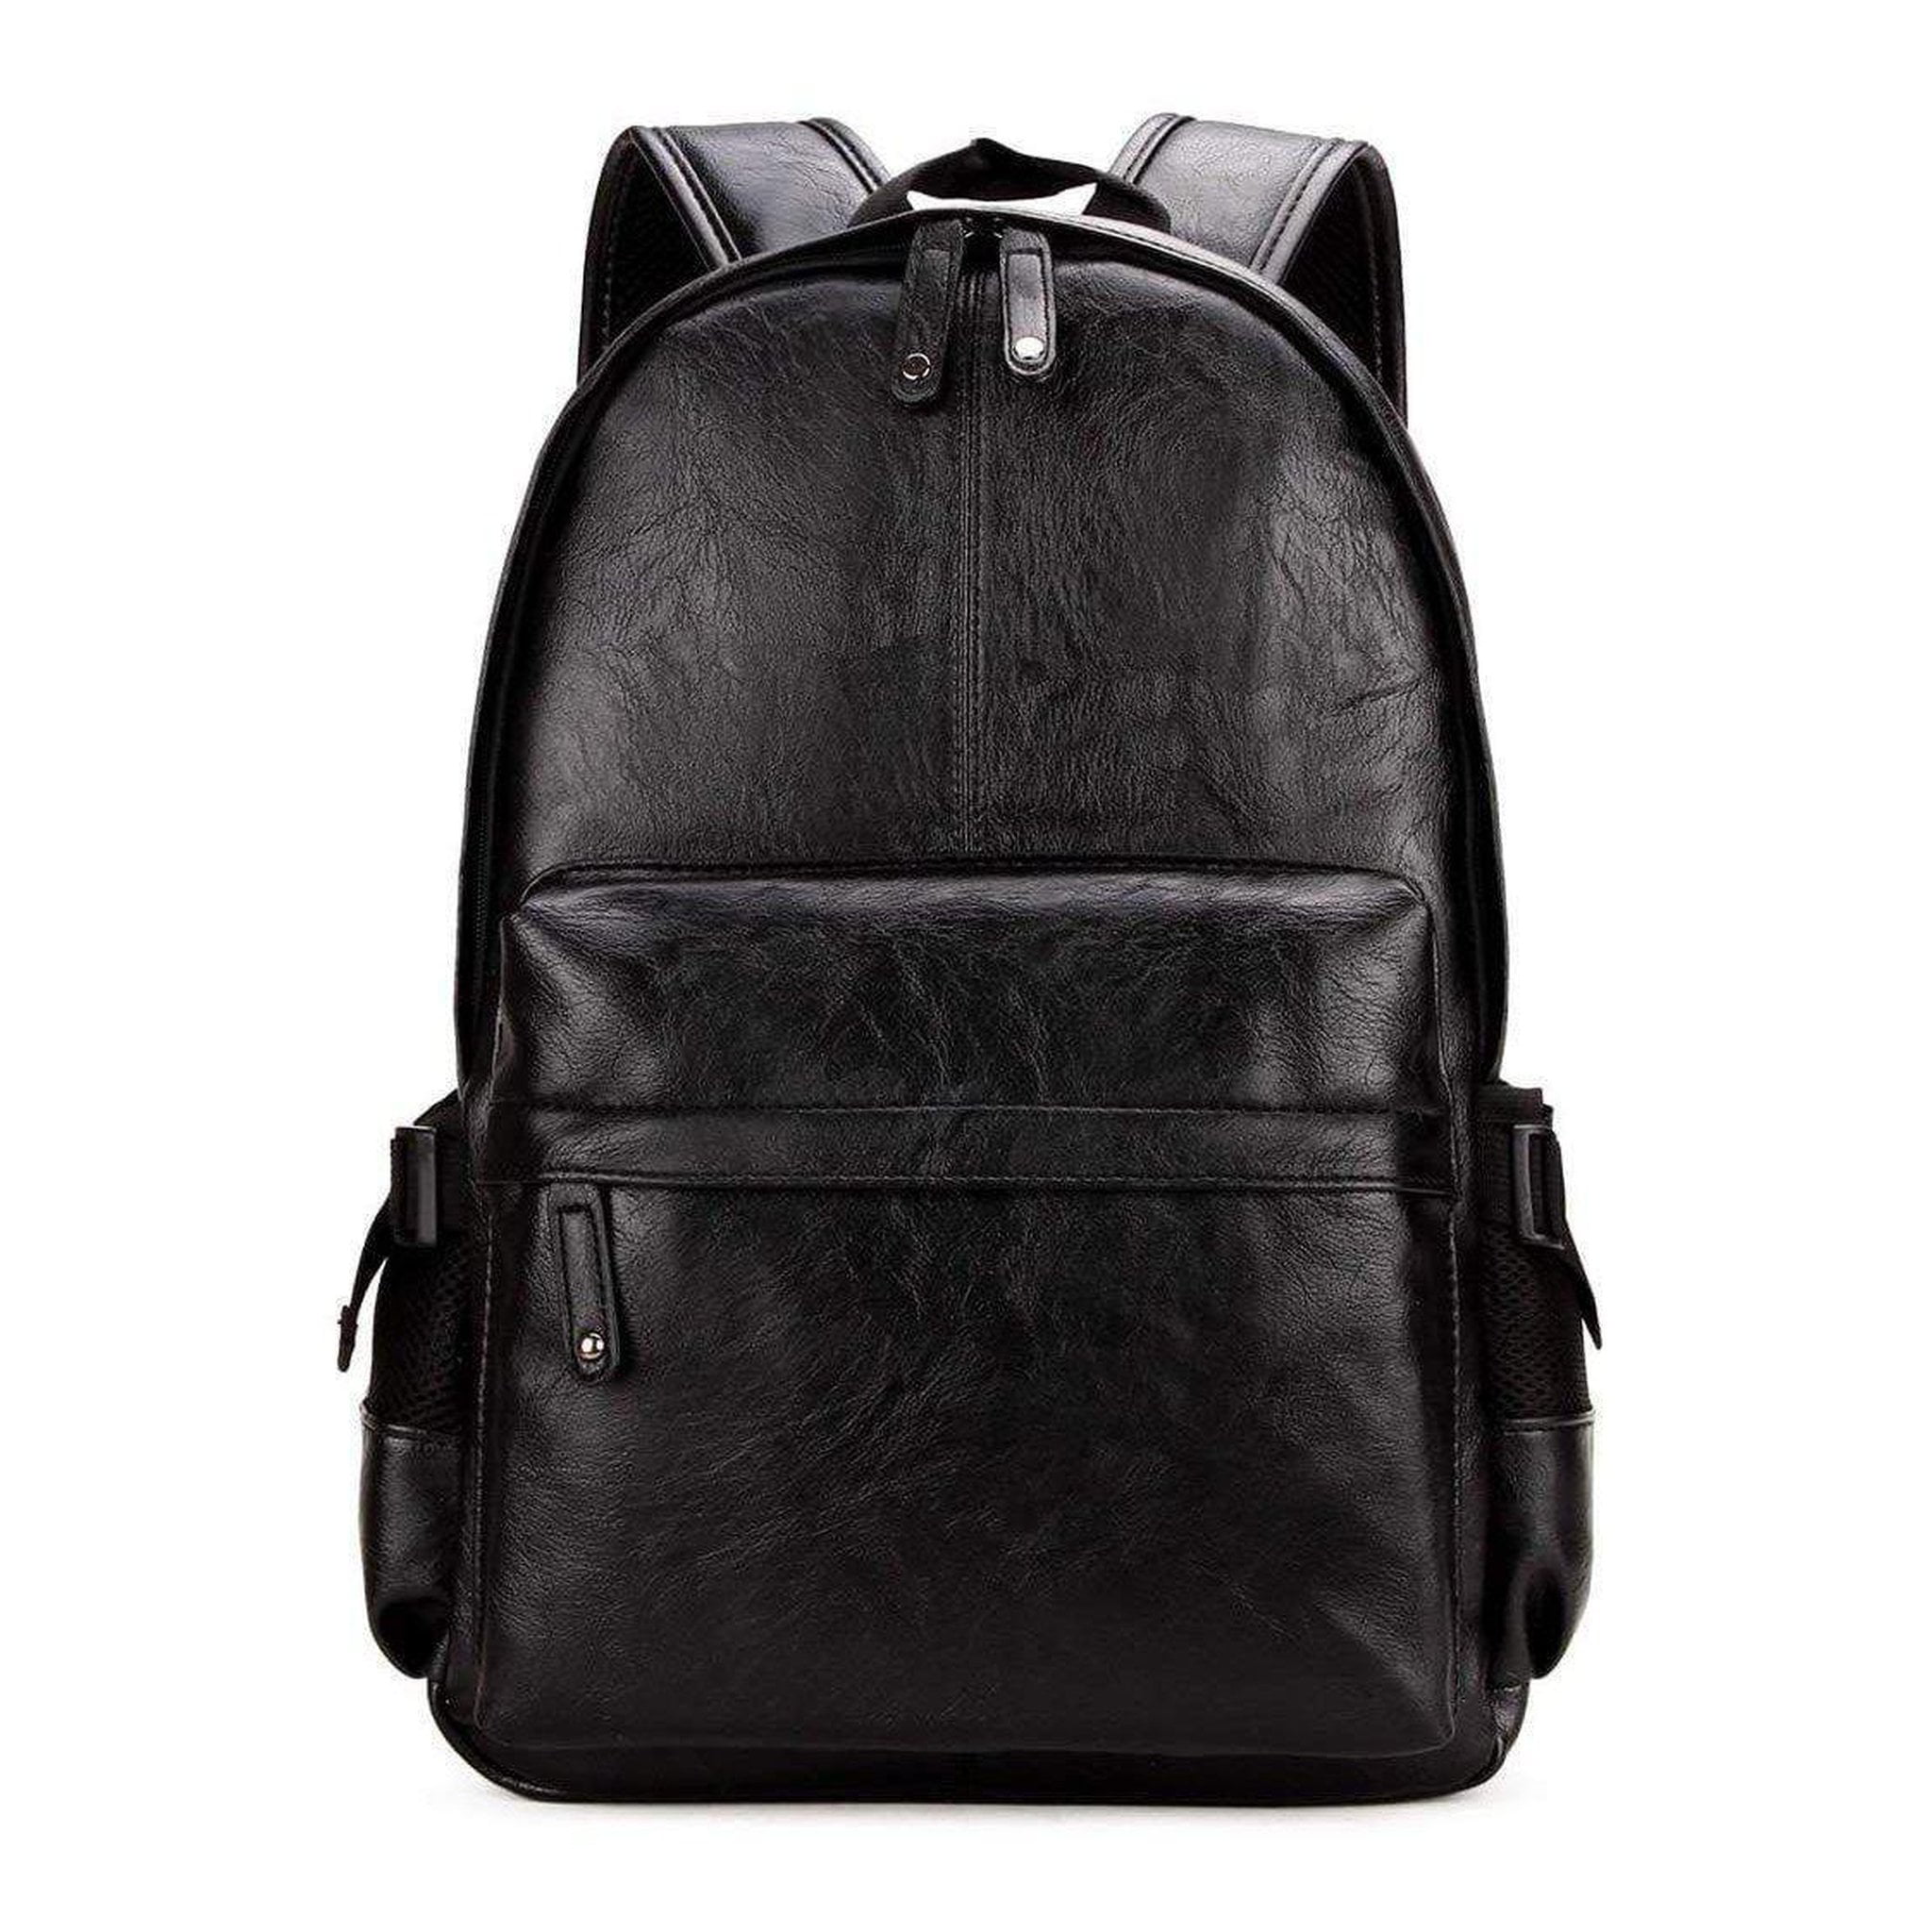 KIMSAI Student Bag Large-Capacity Student Bag Mens Casual Travel Backpack Fashion Trend Backpack Simple Light Outdoor Trendy Grain Fabric Personality Space Opening,Black,301042CM